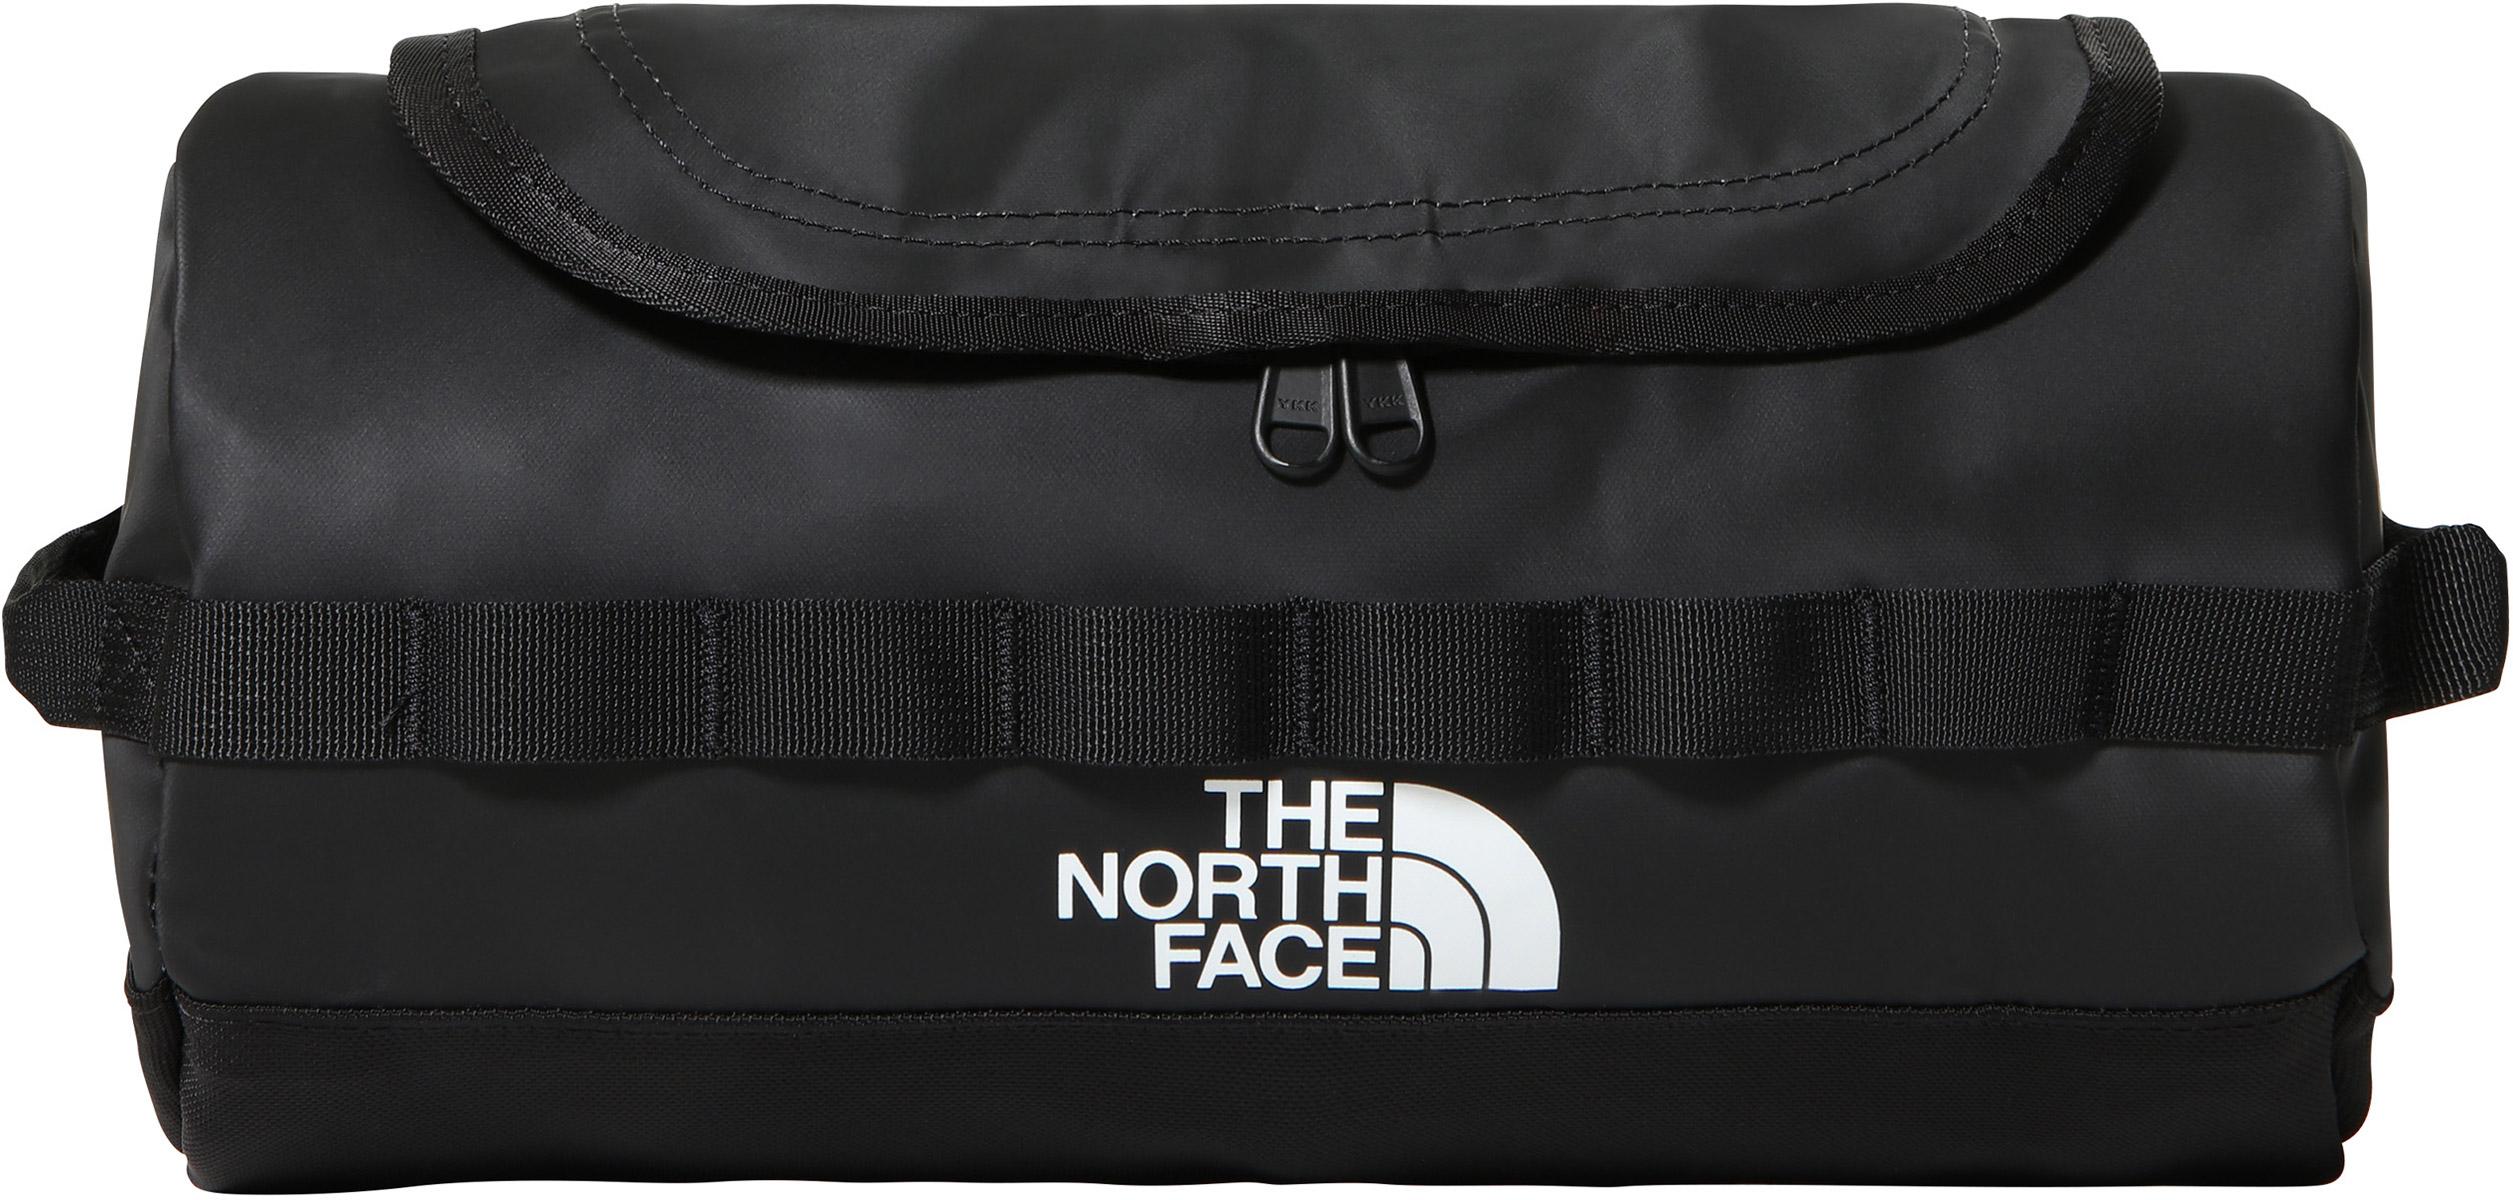 The North Face Travel Canister (large) - Tnf Black/tnf White